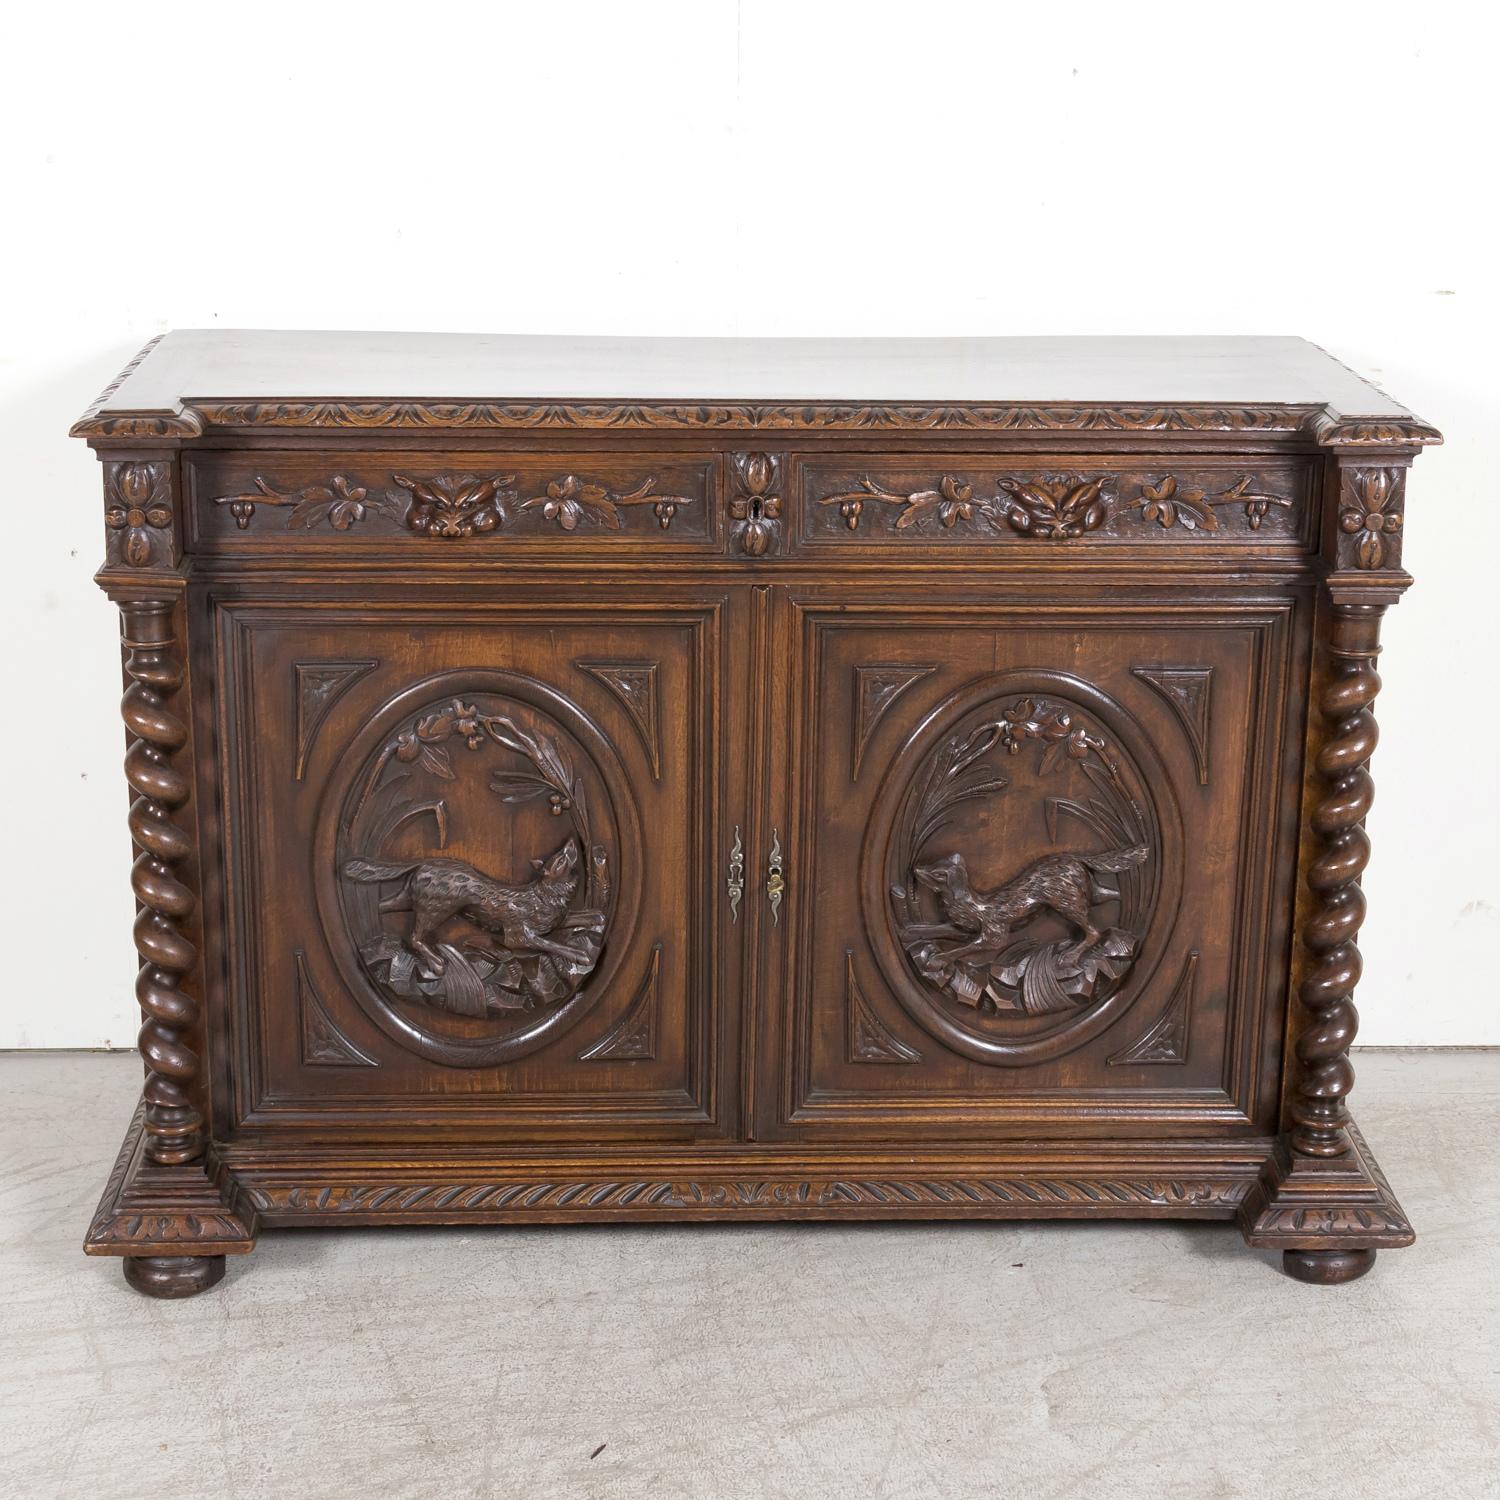 A very nice 19th century Louis XIII style buffet de chasse or hunt buffet handcrafted by talented artisans near Lyon of solid oak, circa 1880s. This handsome French Renaissance buffet features carved gadrooning on the top edge above two carved